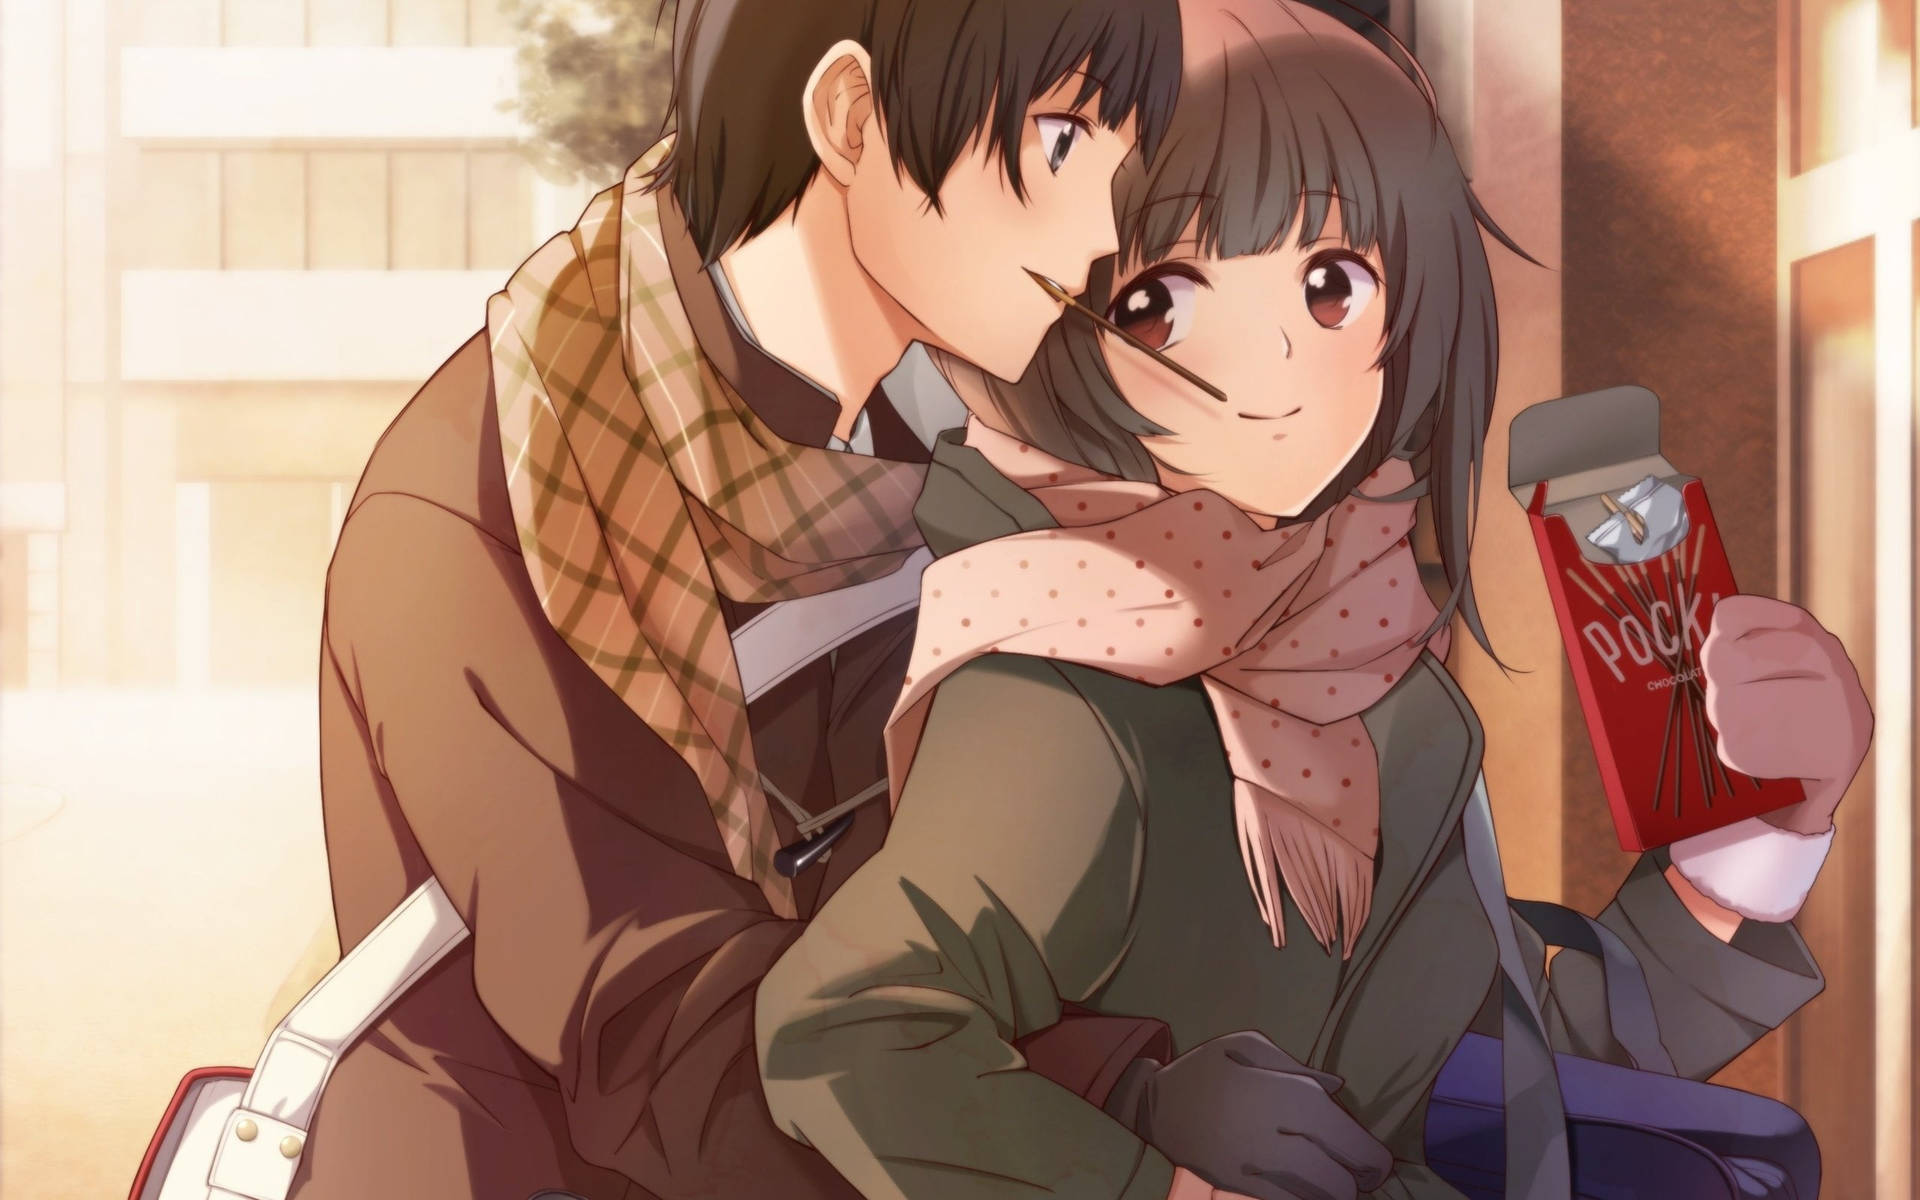 Sweet Couple Anime Wallpaper 58 pictures